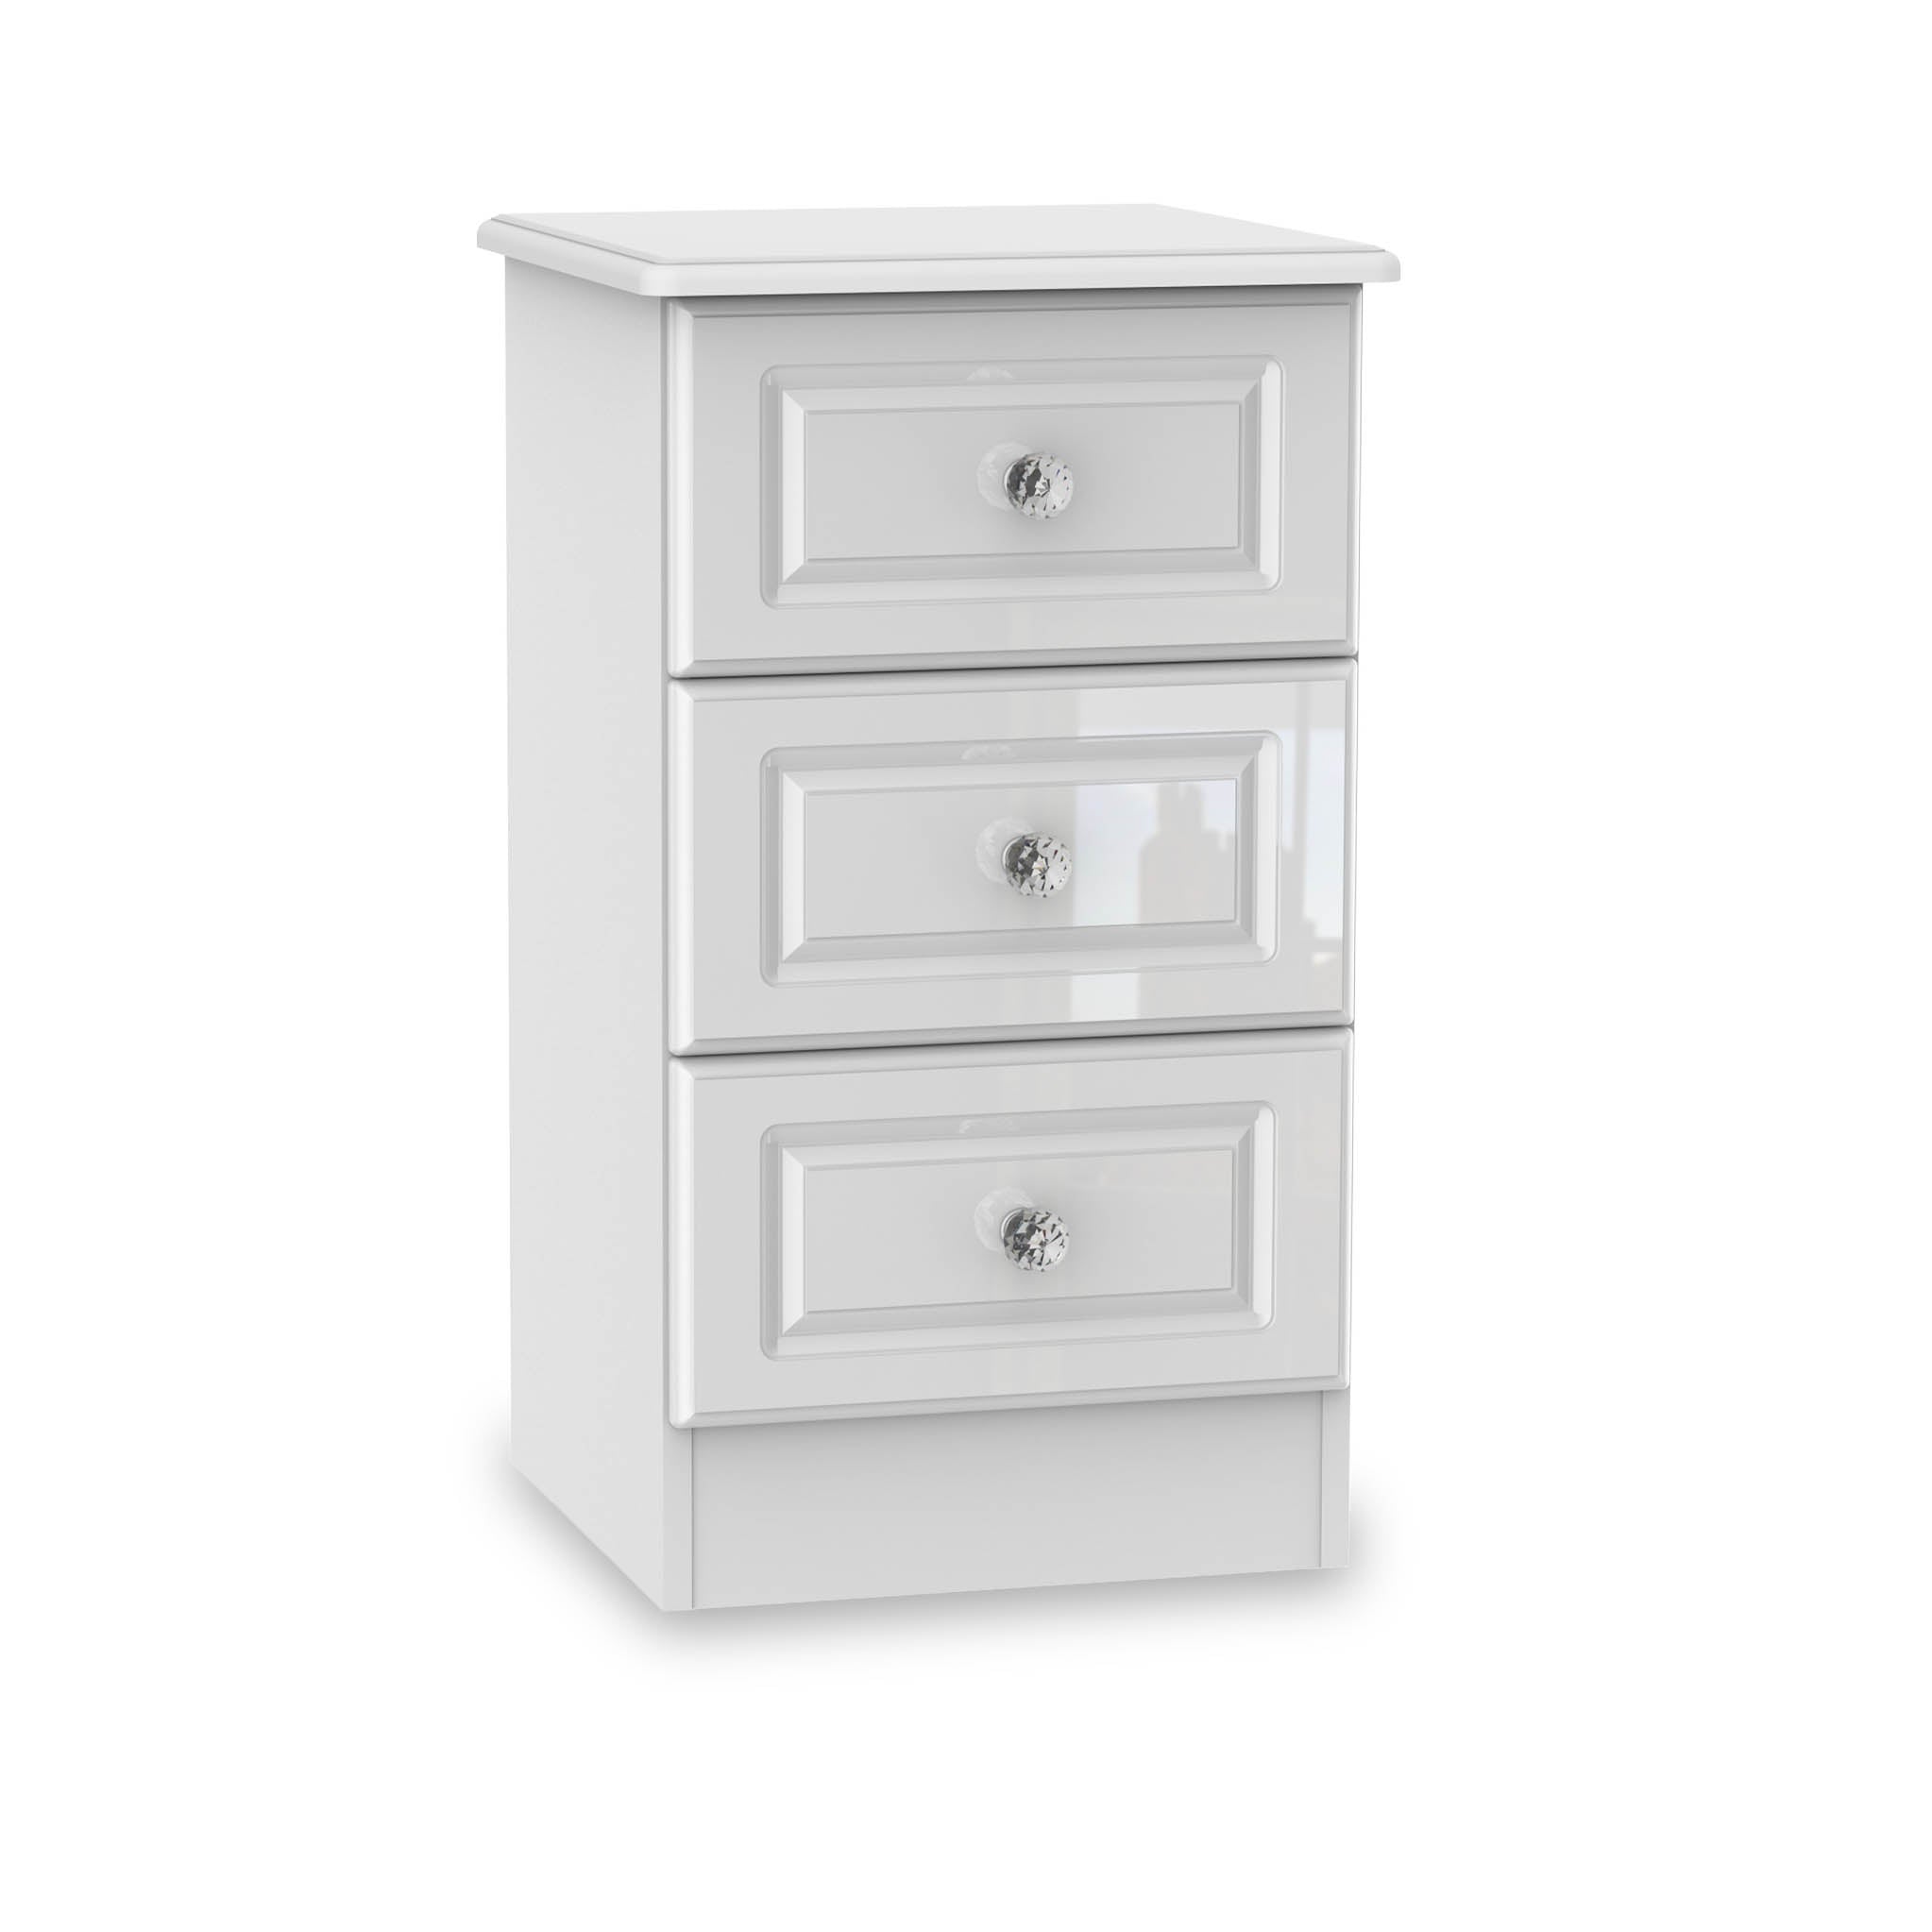 Kinsley White Gloss Contemporary 3 Drawer Bedside Cabinet Roseland